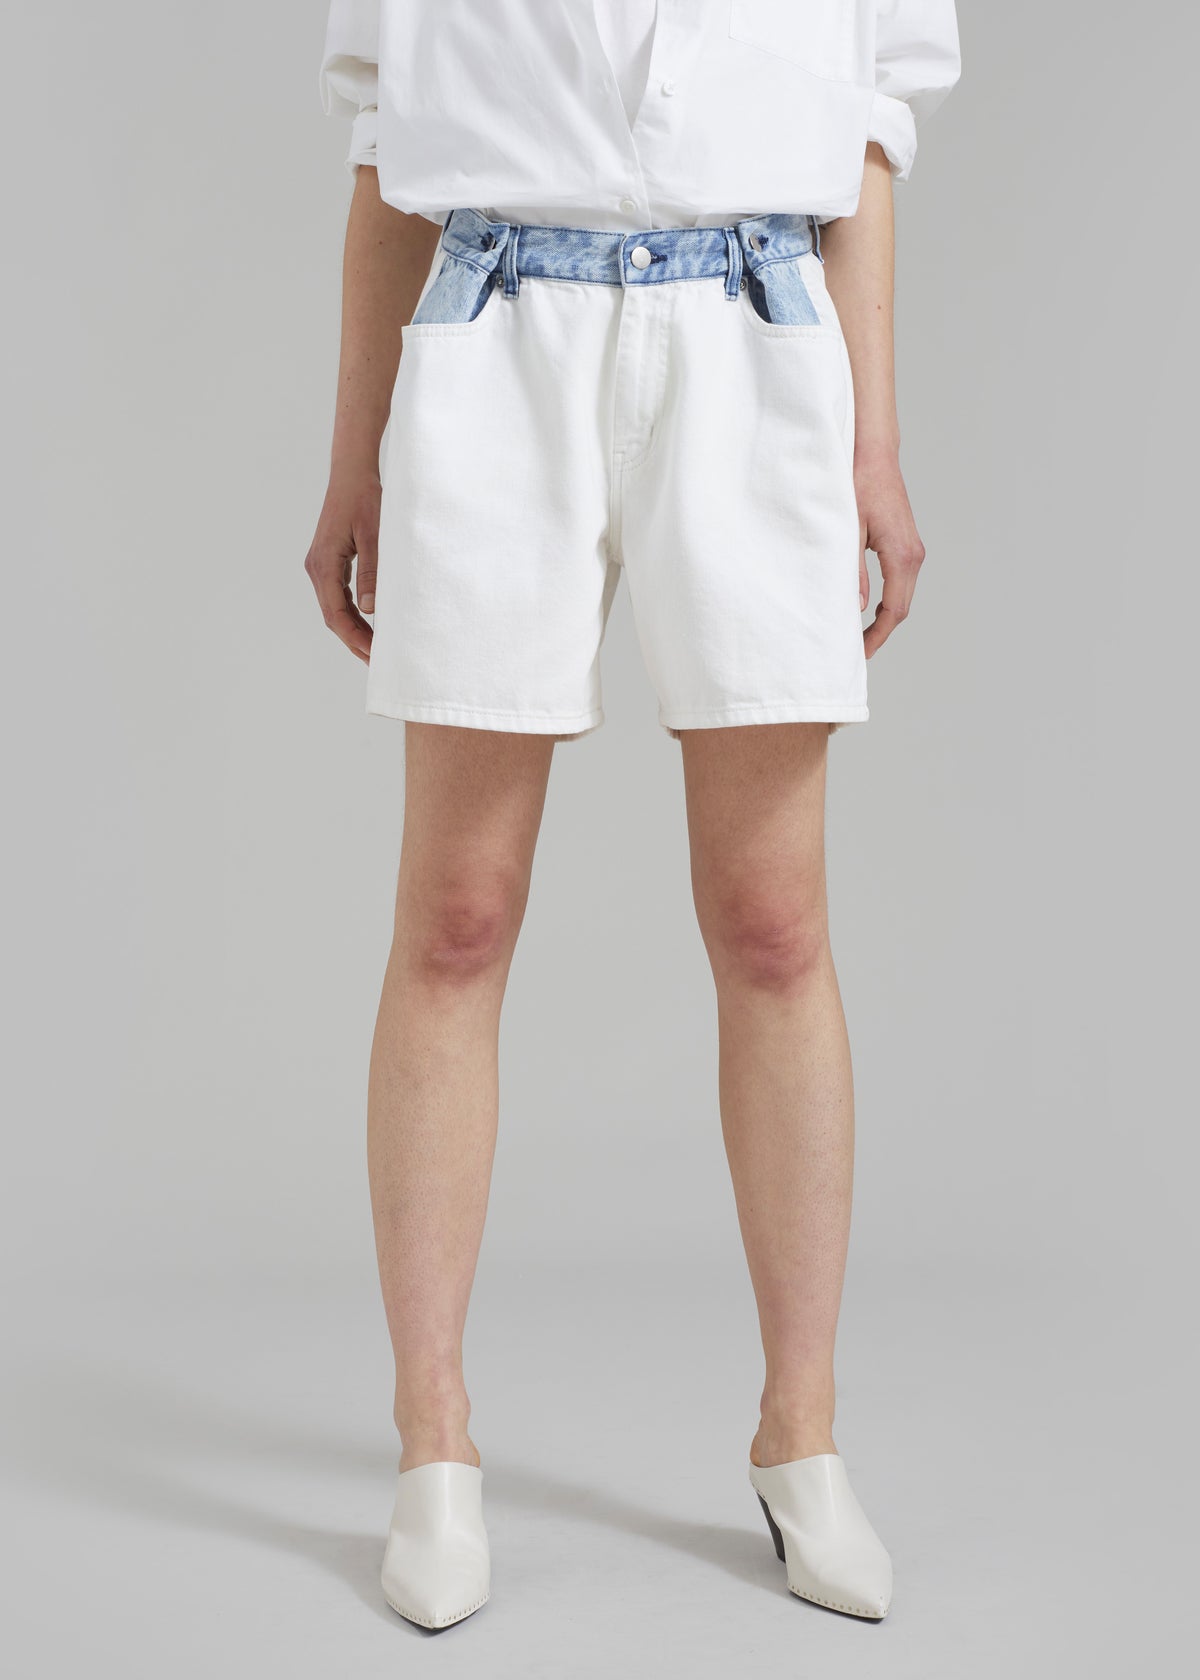 larger Shop discount receive Frankie buy, more the Denim Off you will The Contrast The - you White/Blue Shorts Hayla